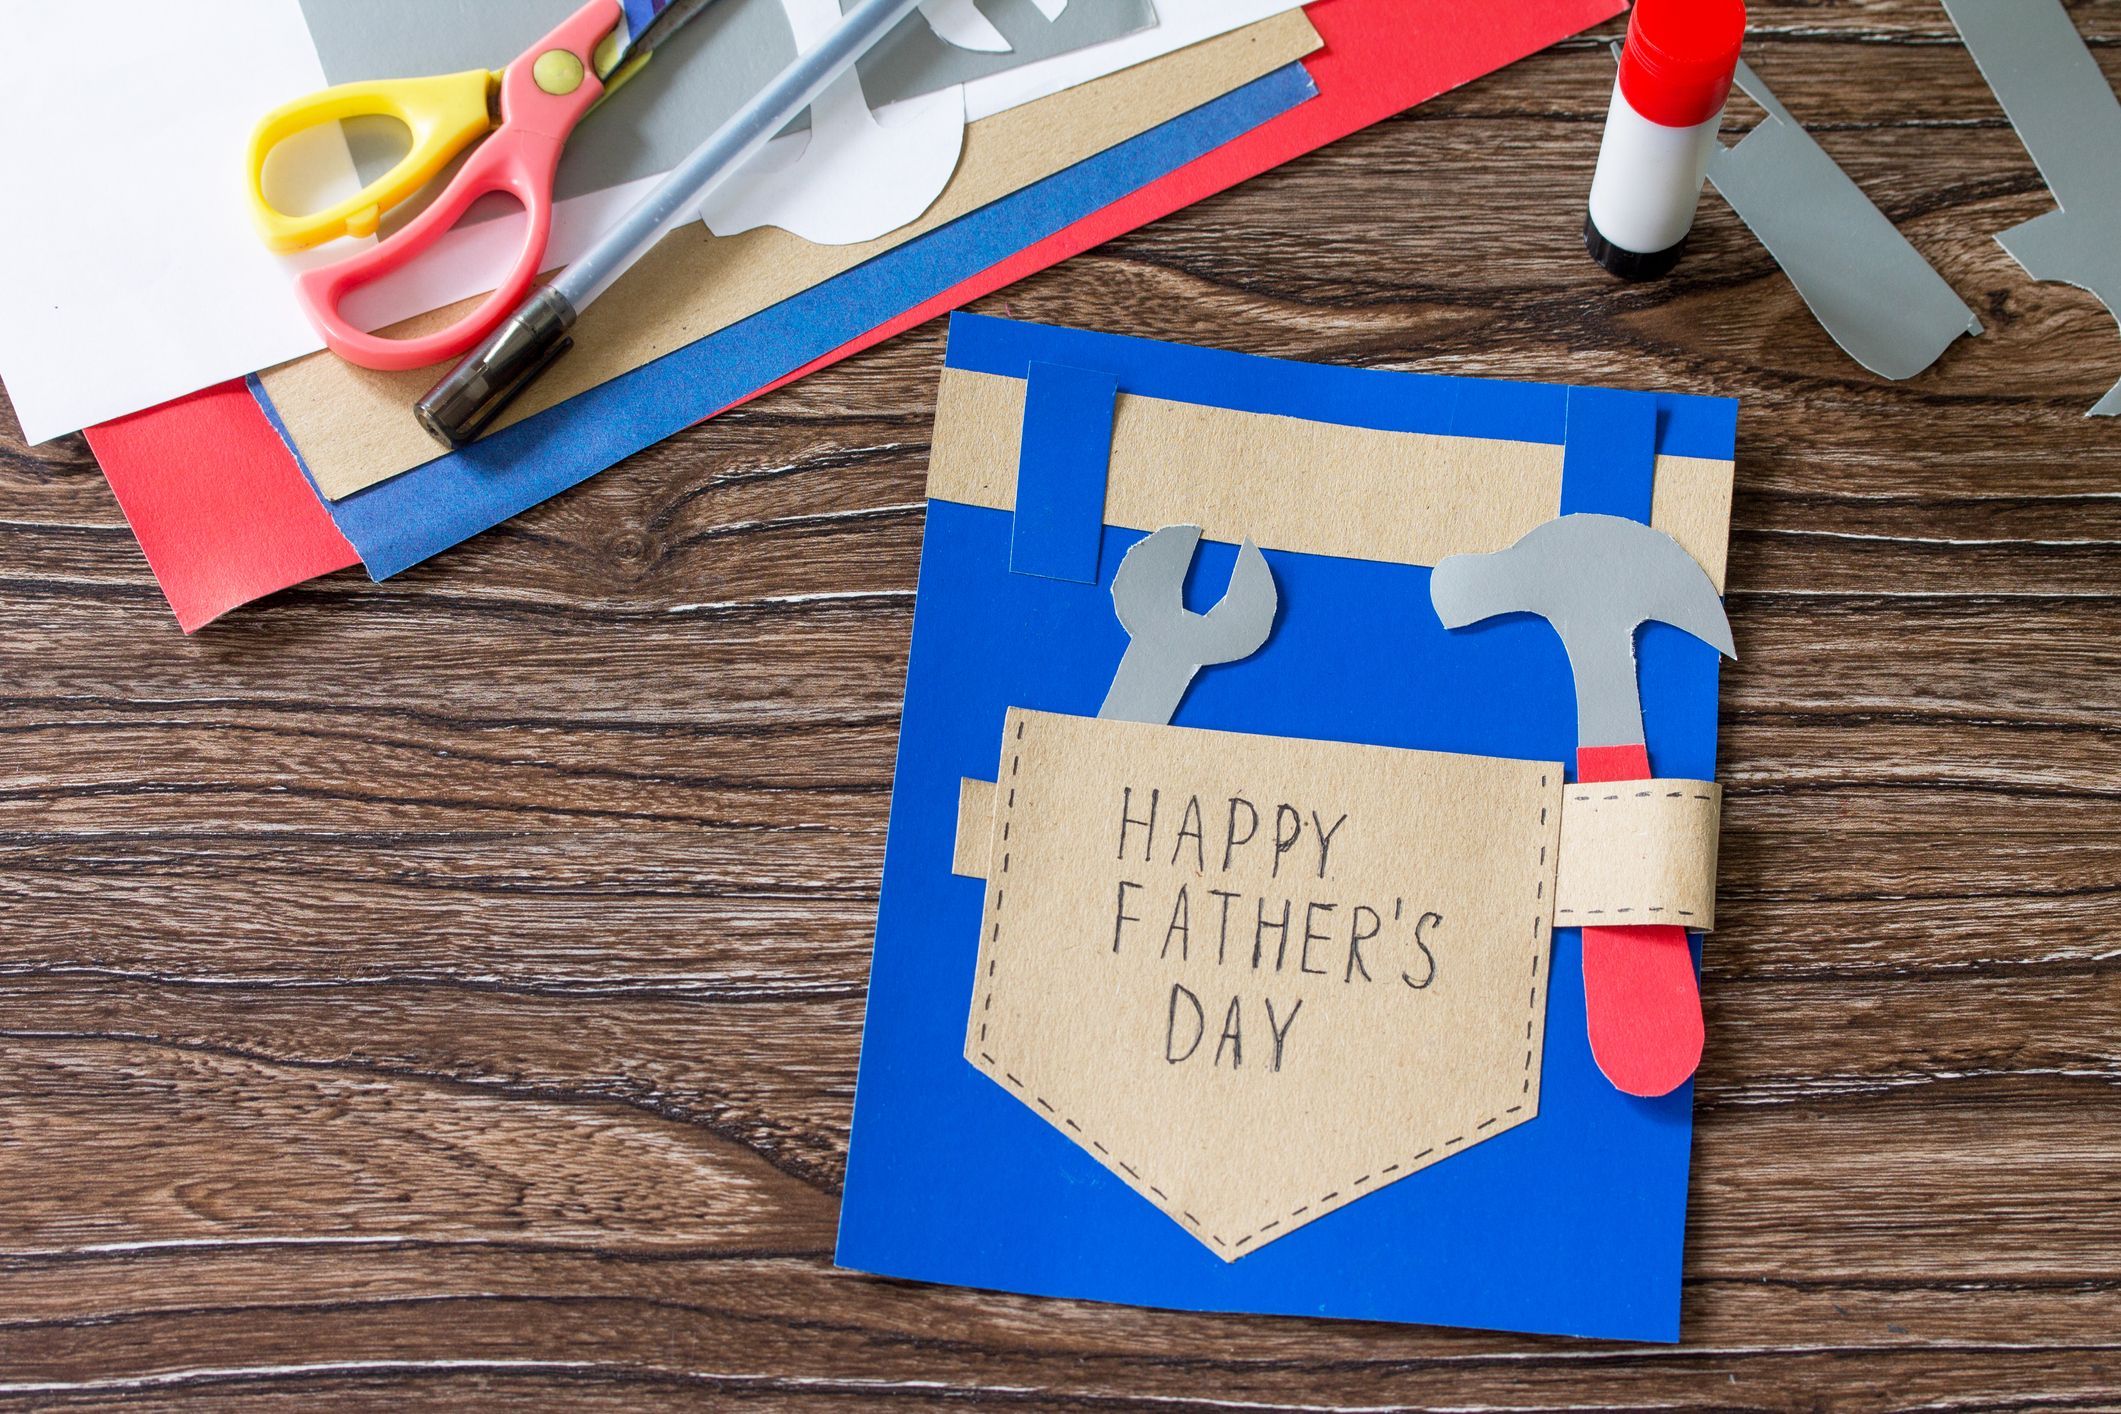 26 Best DIY Fathers Day Gifts 2021  Free Homemade Gift Ideas for Dad